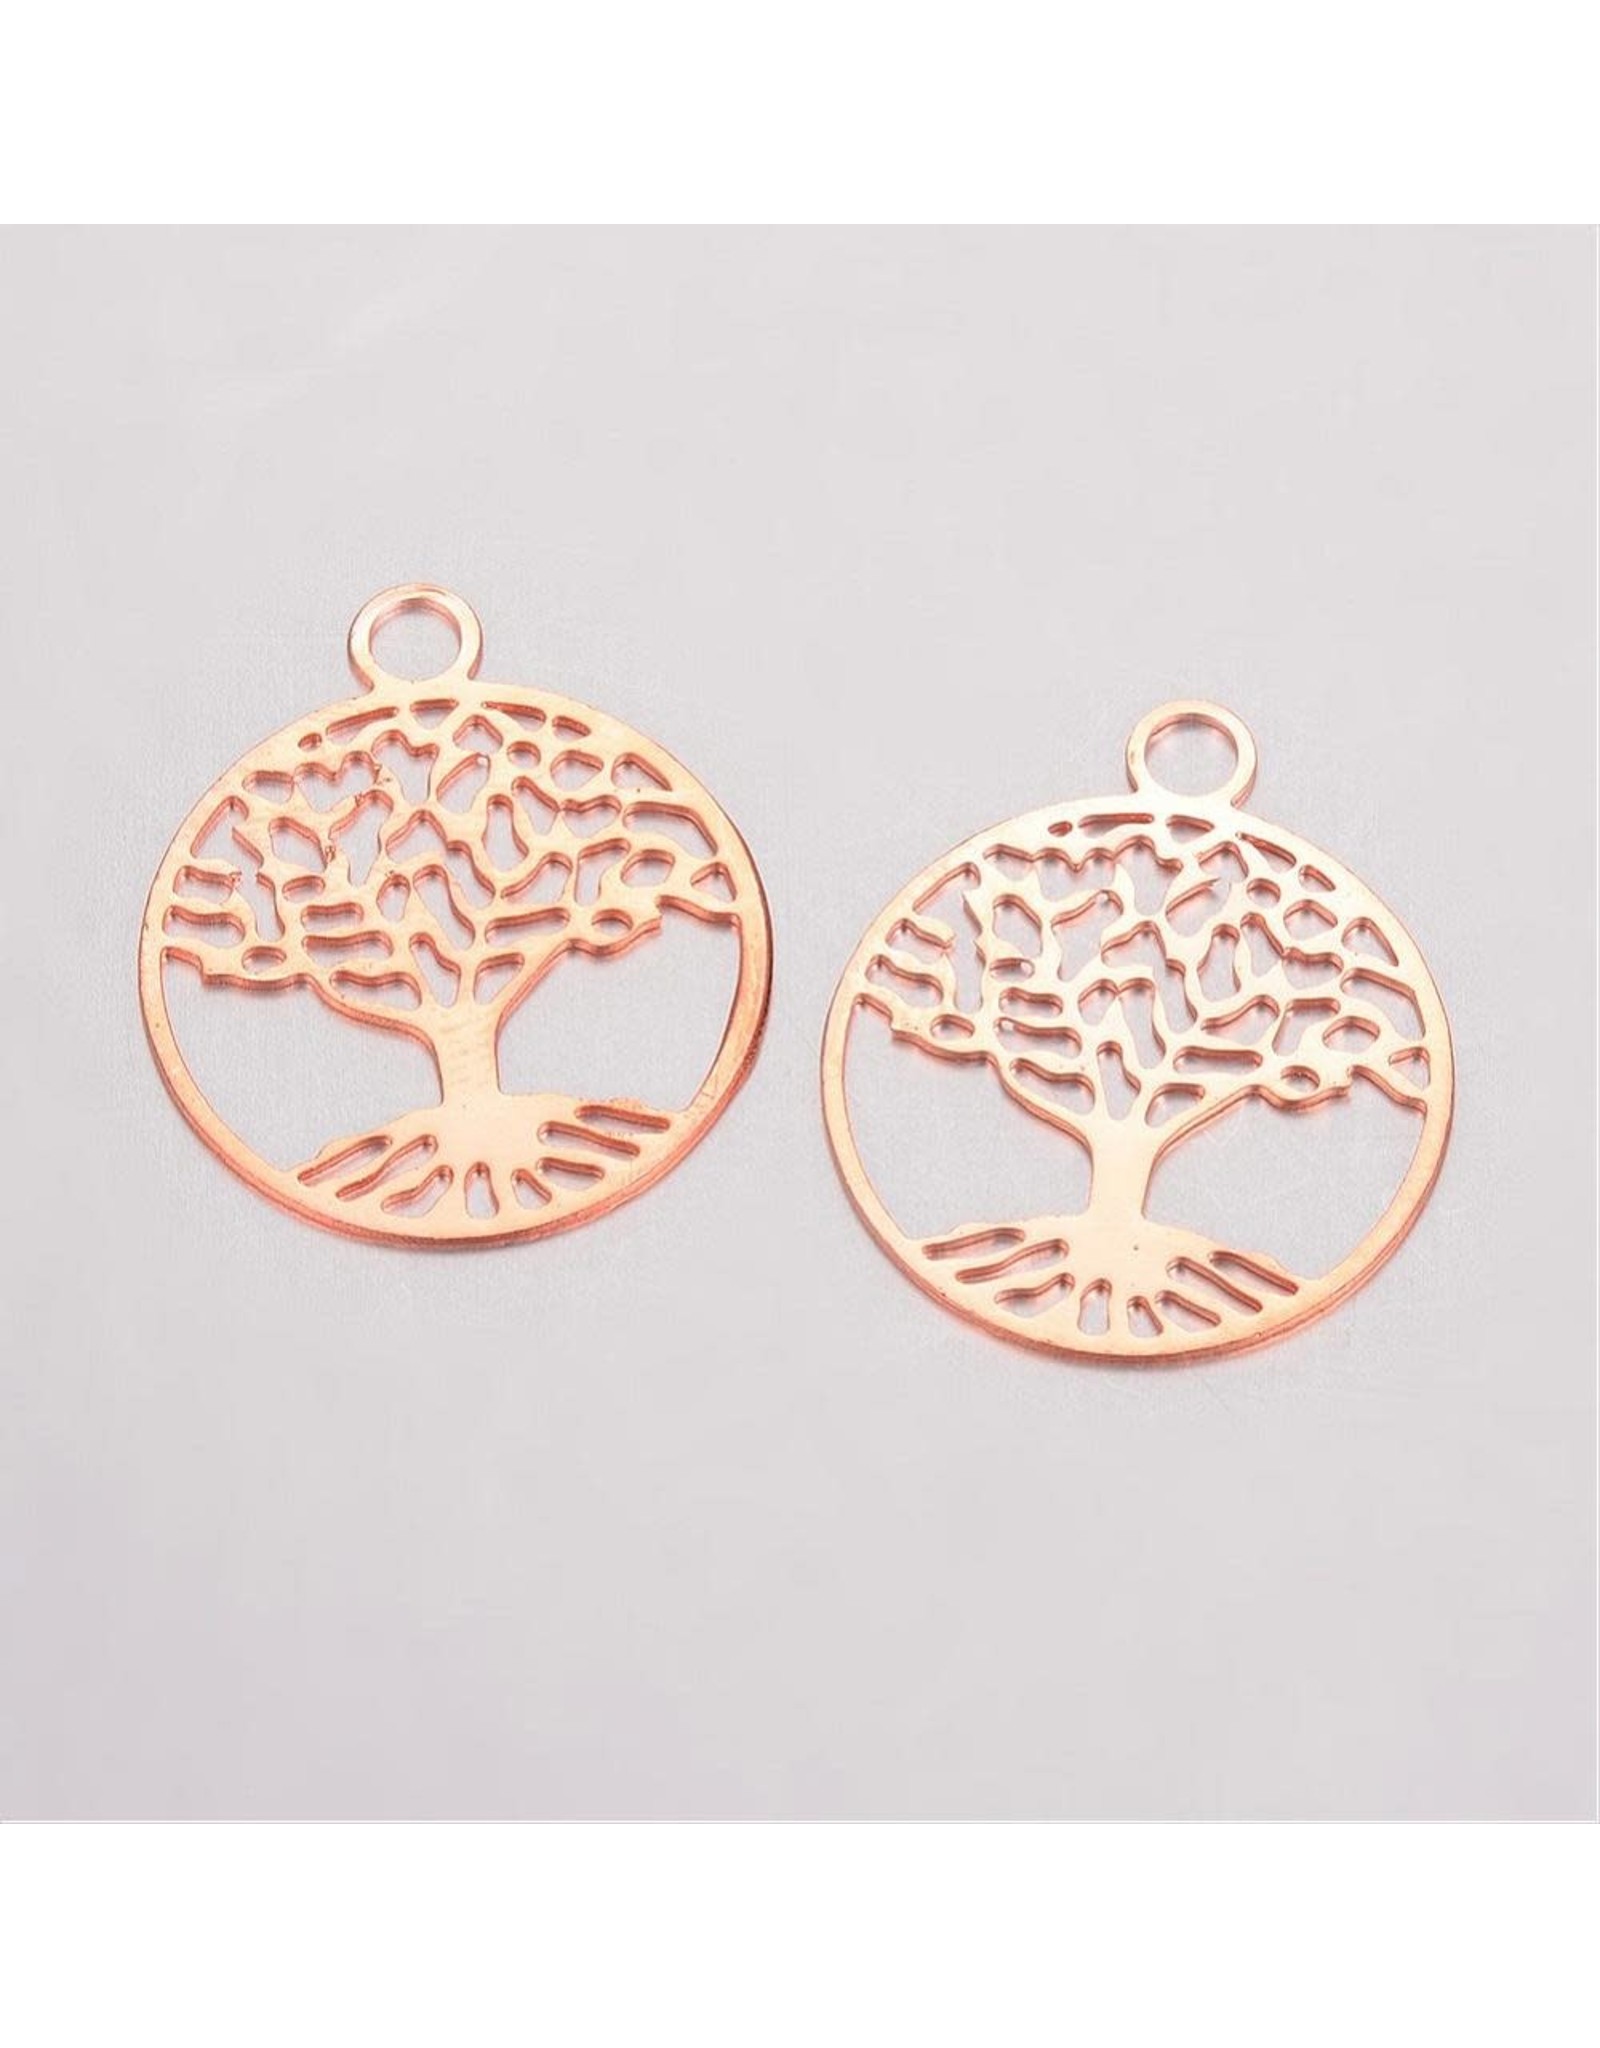 Tree of Life  24x20mm  Rose Gold  NF  x5